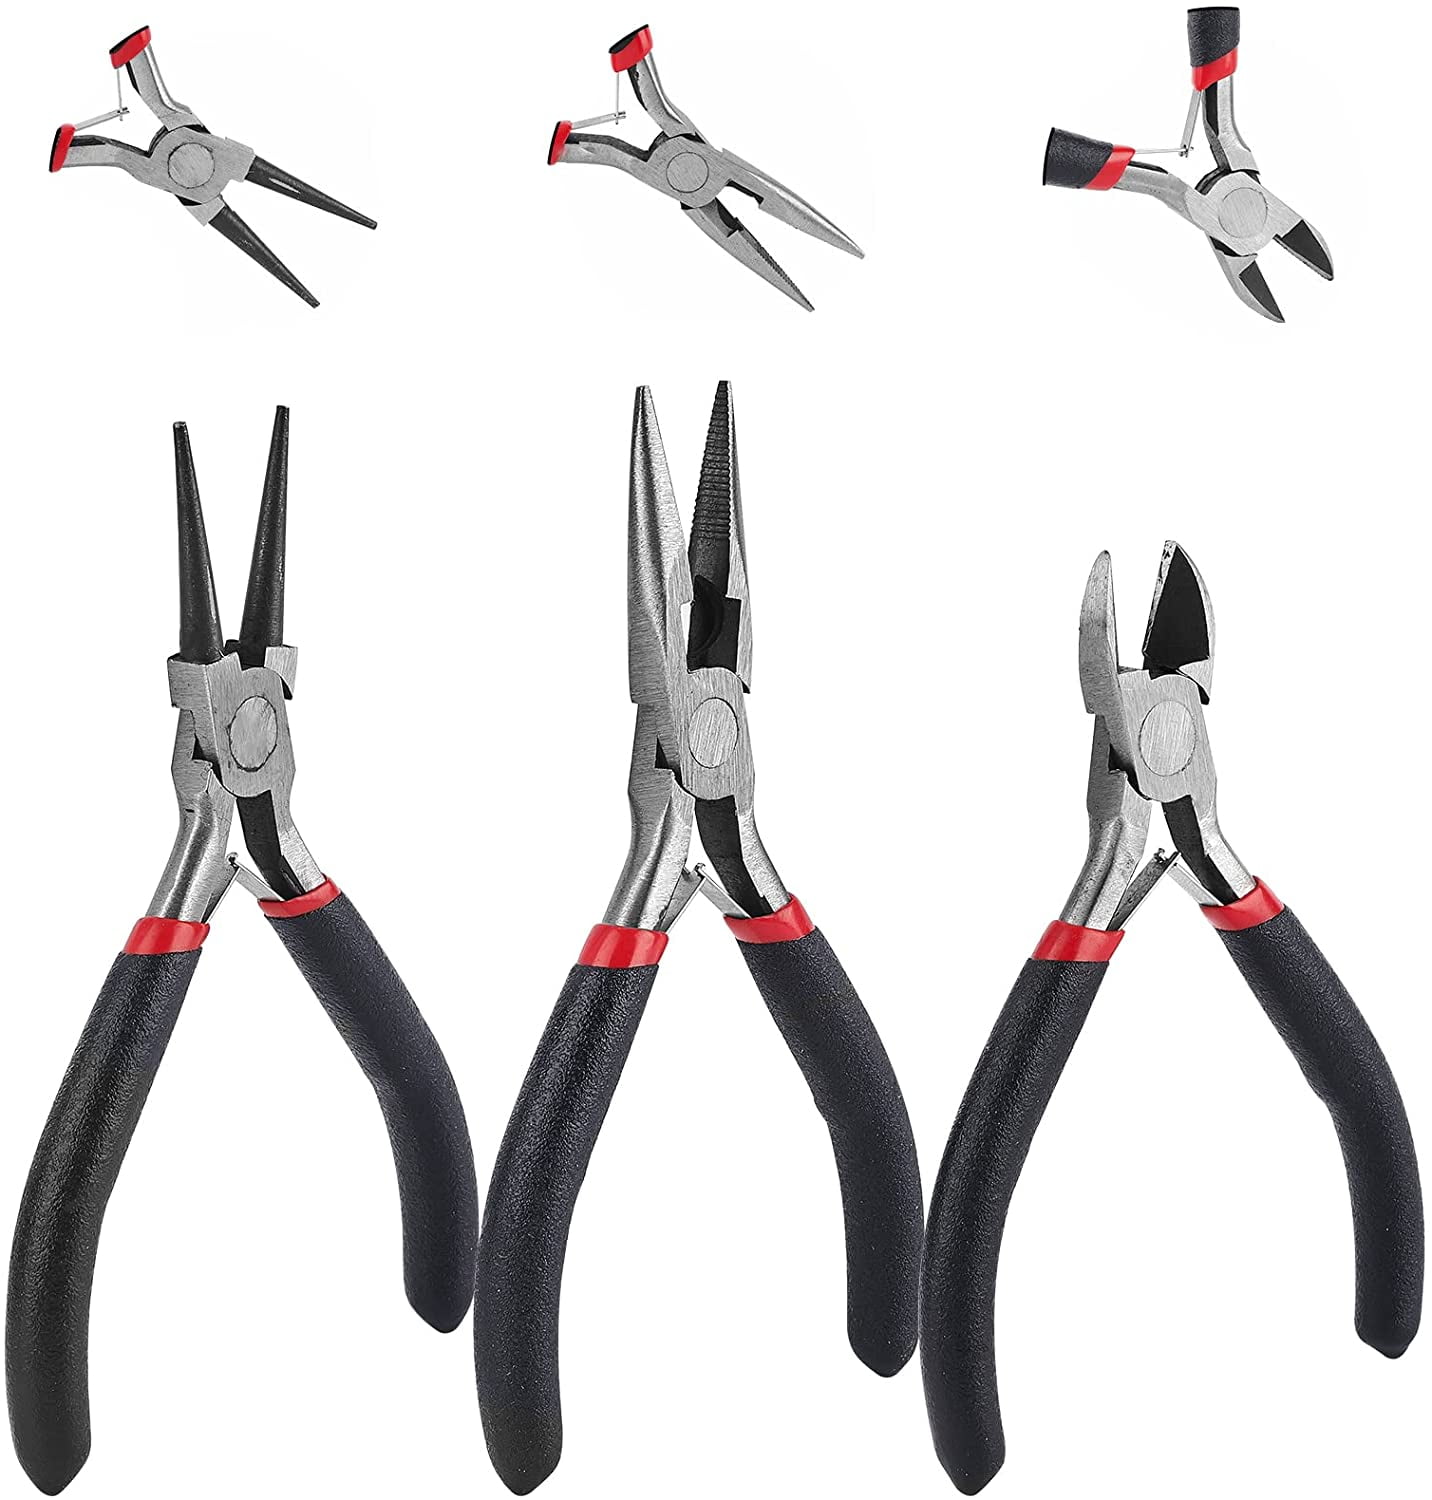 3 Pack of Iron Pliers, Jewelry Tool Set, Great Value Kit, Round